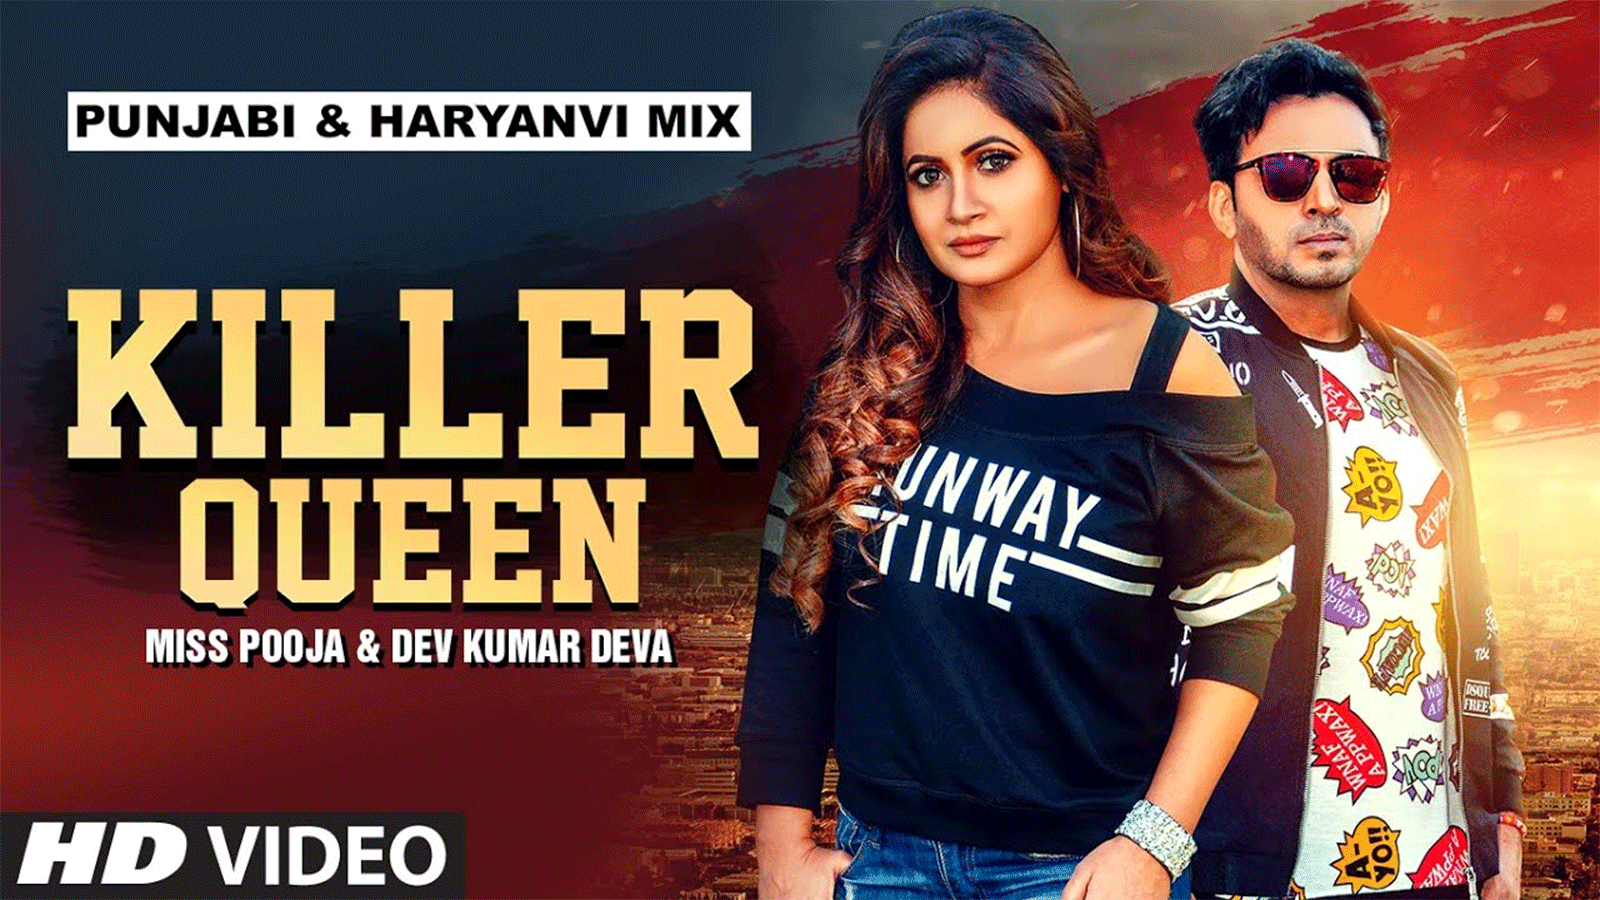 Watch Latest 2021 Punjabi Song 'Killer Queen' Sung By Miss Pooja and Dev  Kumar Deva | Punjabi Video Songs - Times of India